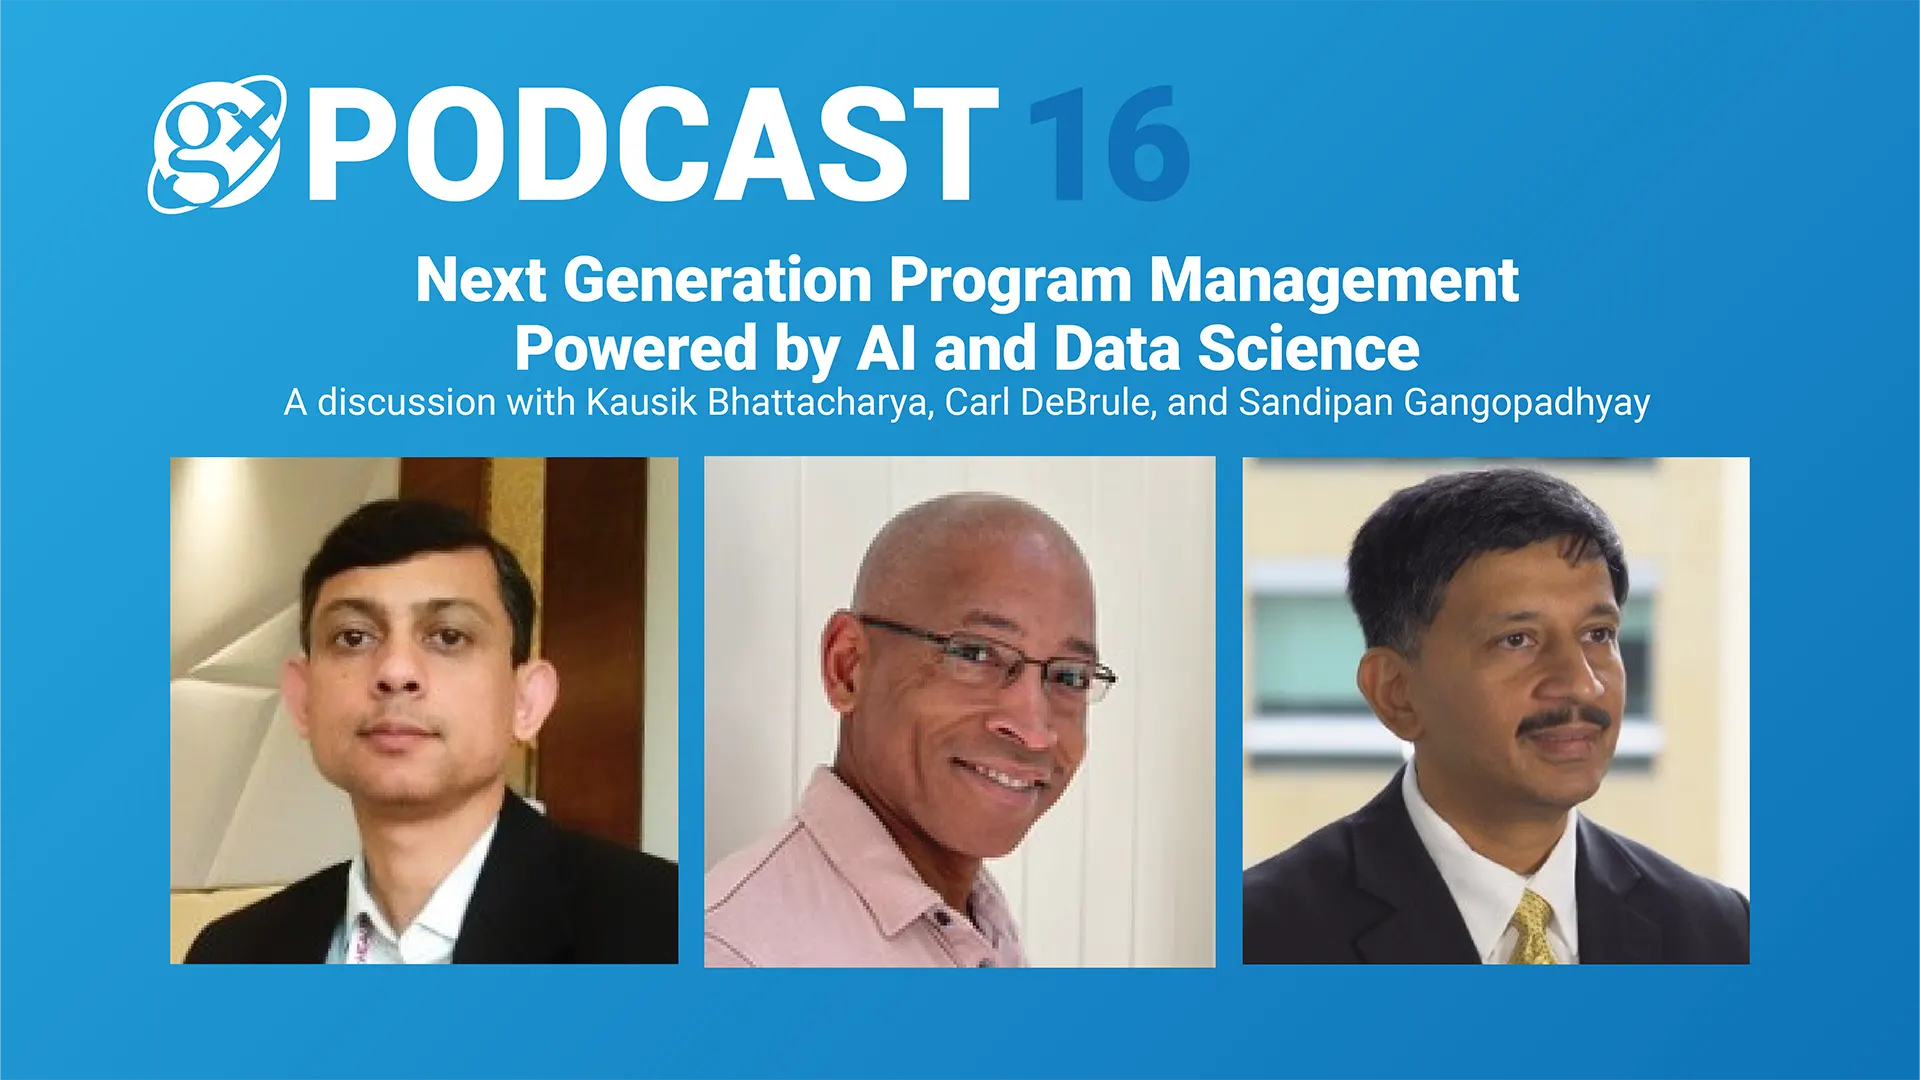 Gx Podcast 16: Next Generation Program Management Powered by AI and Data Science